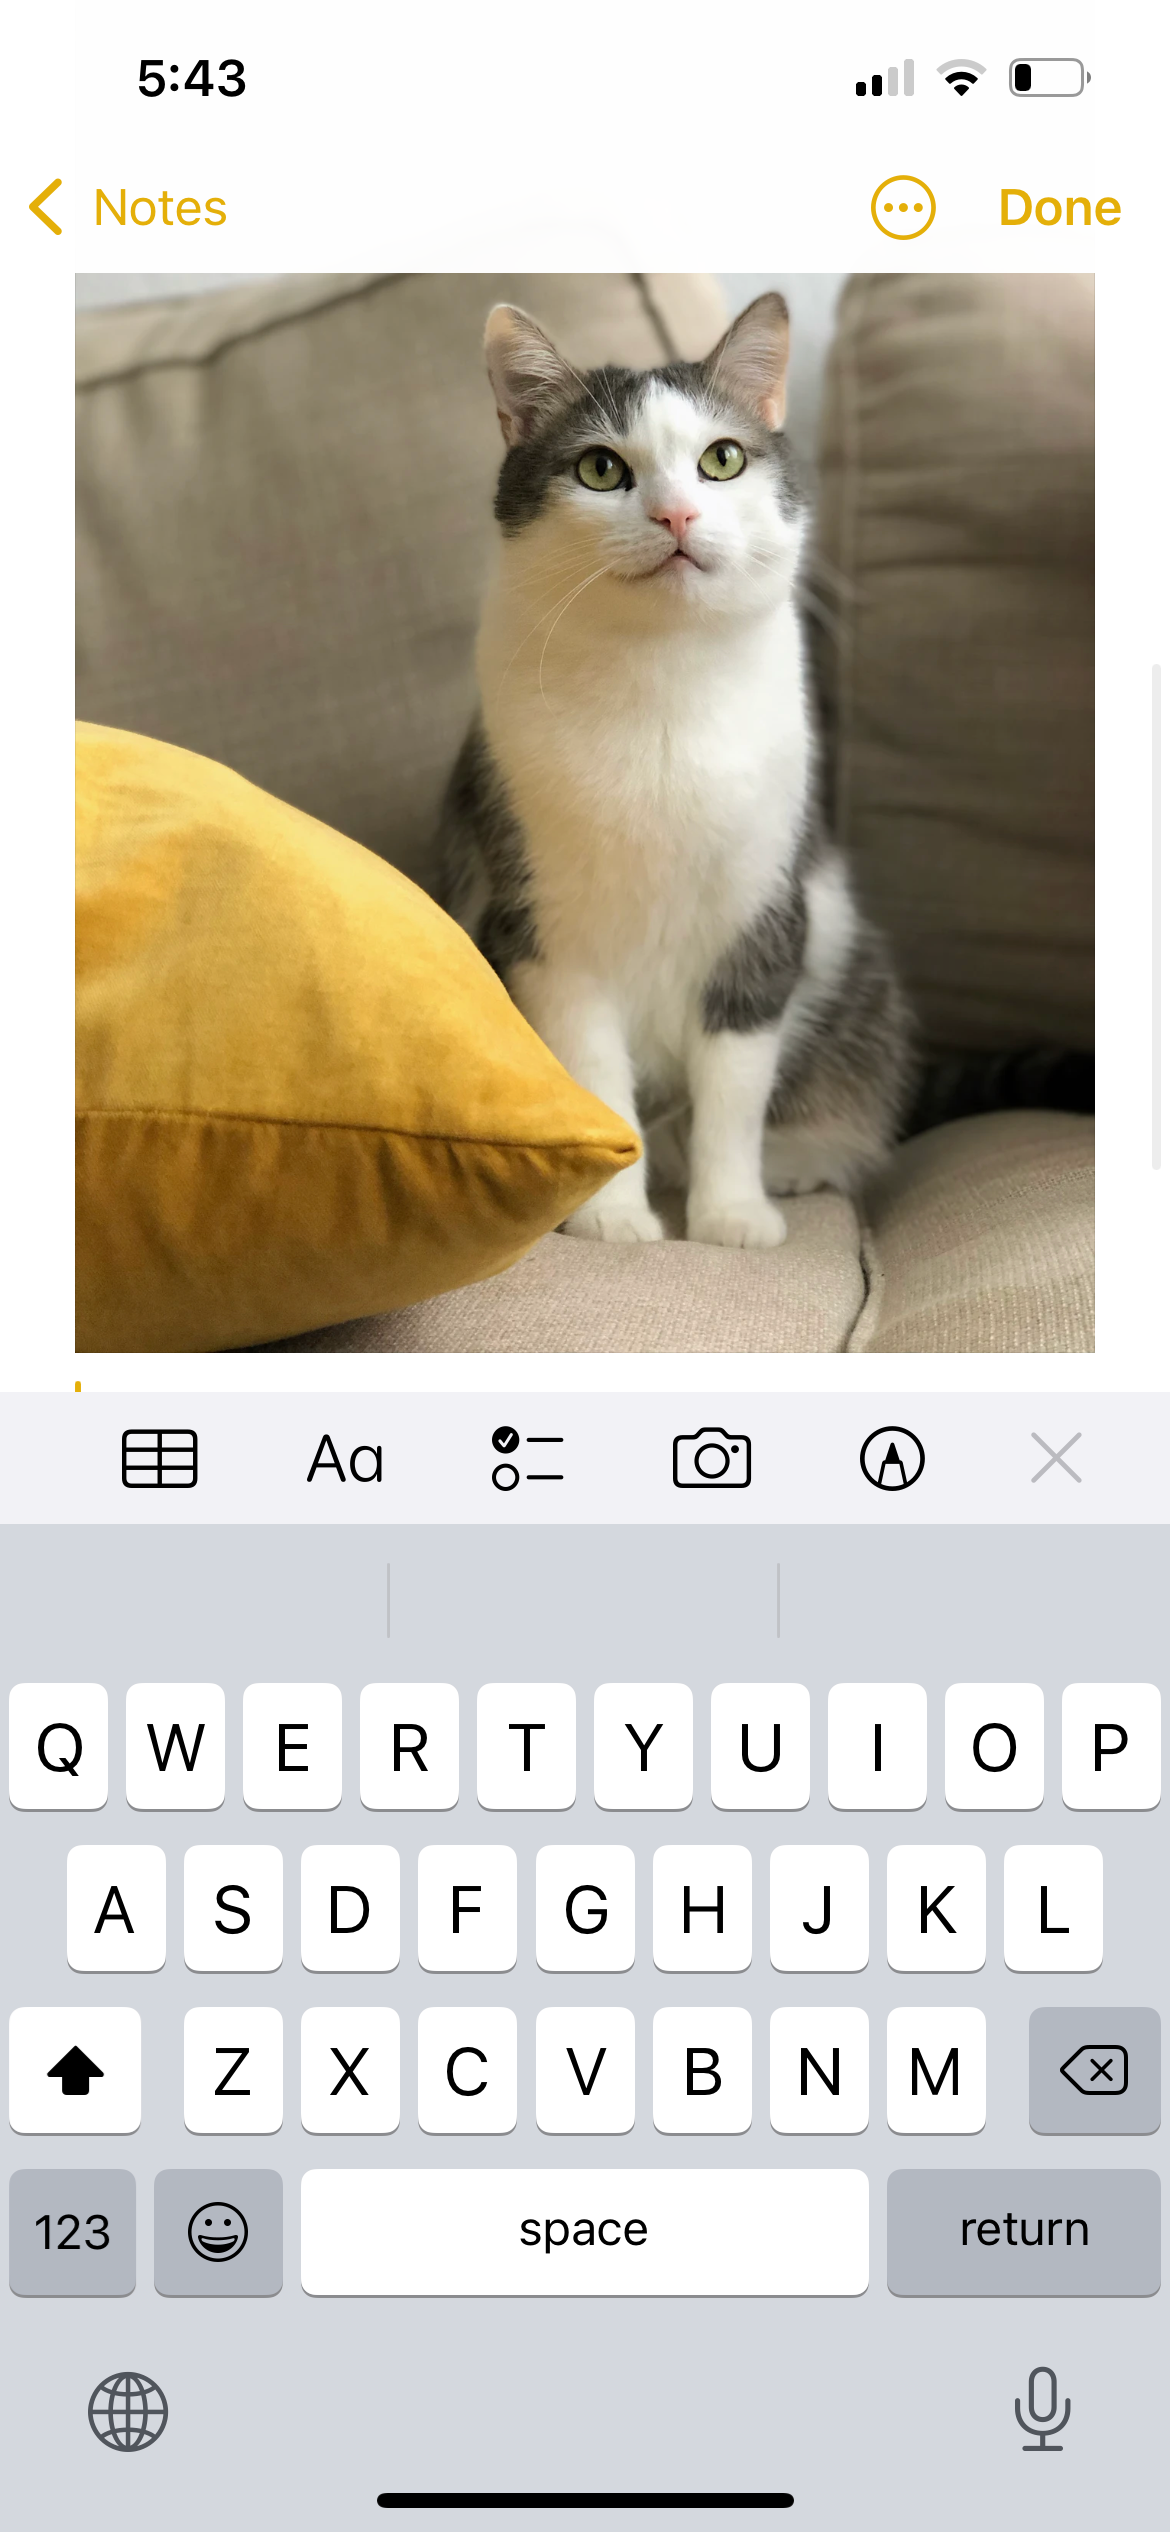 photo of cat on sofa in notes app